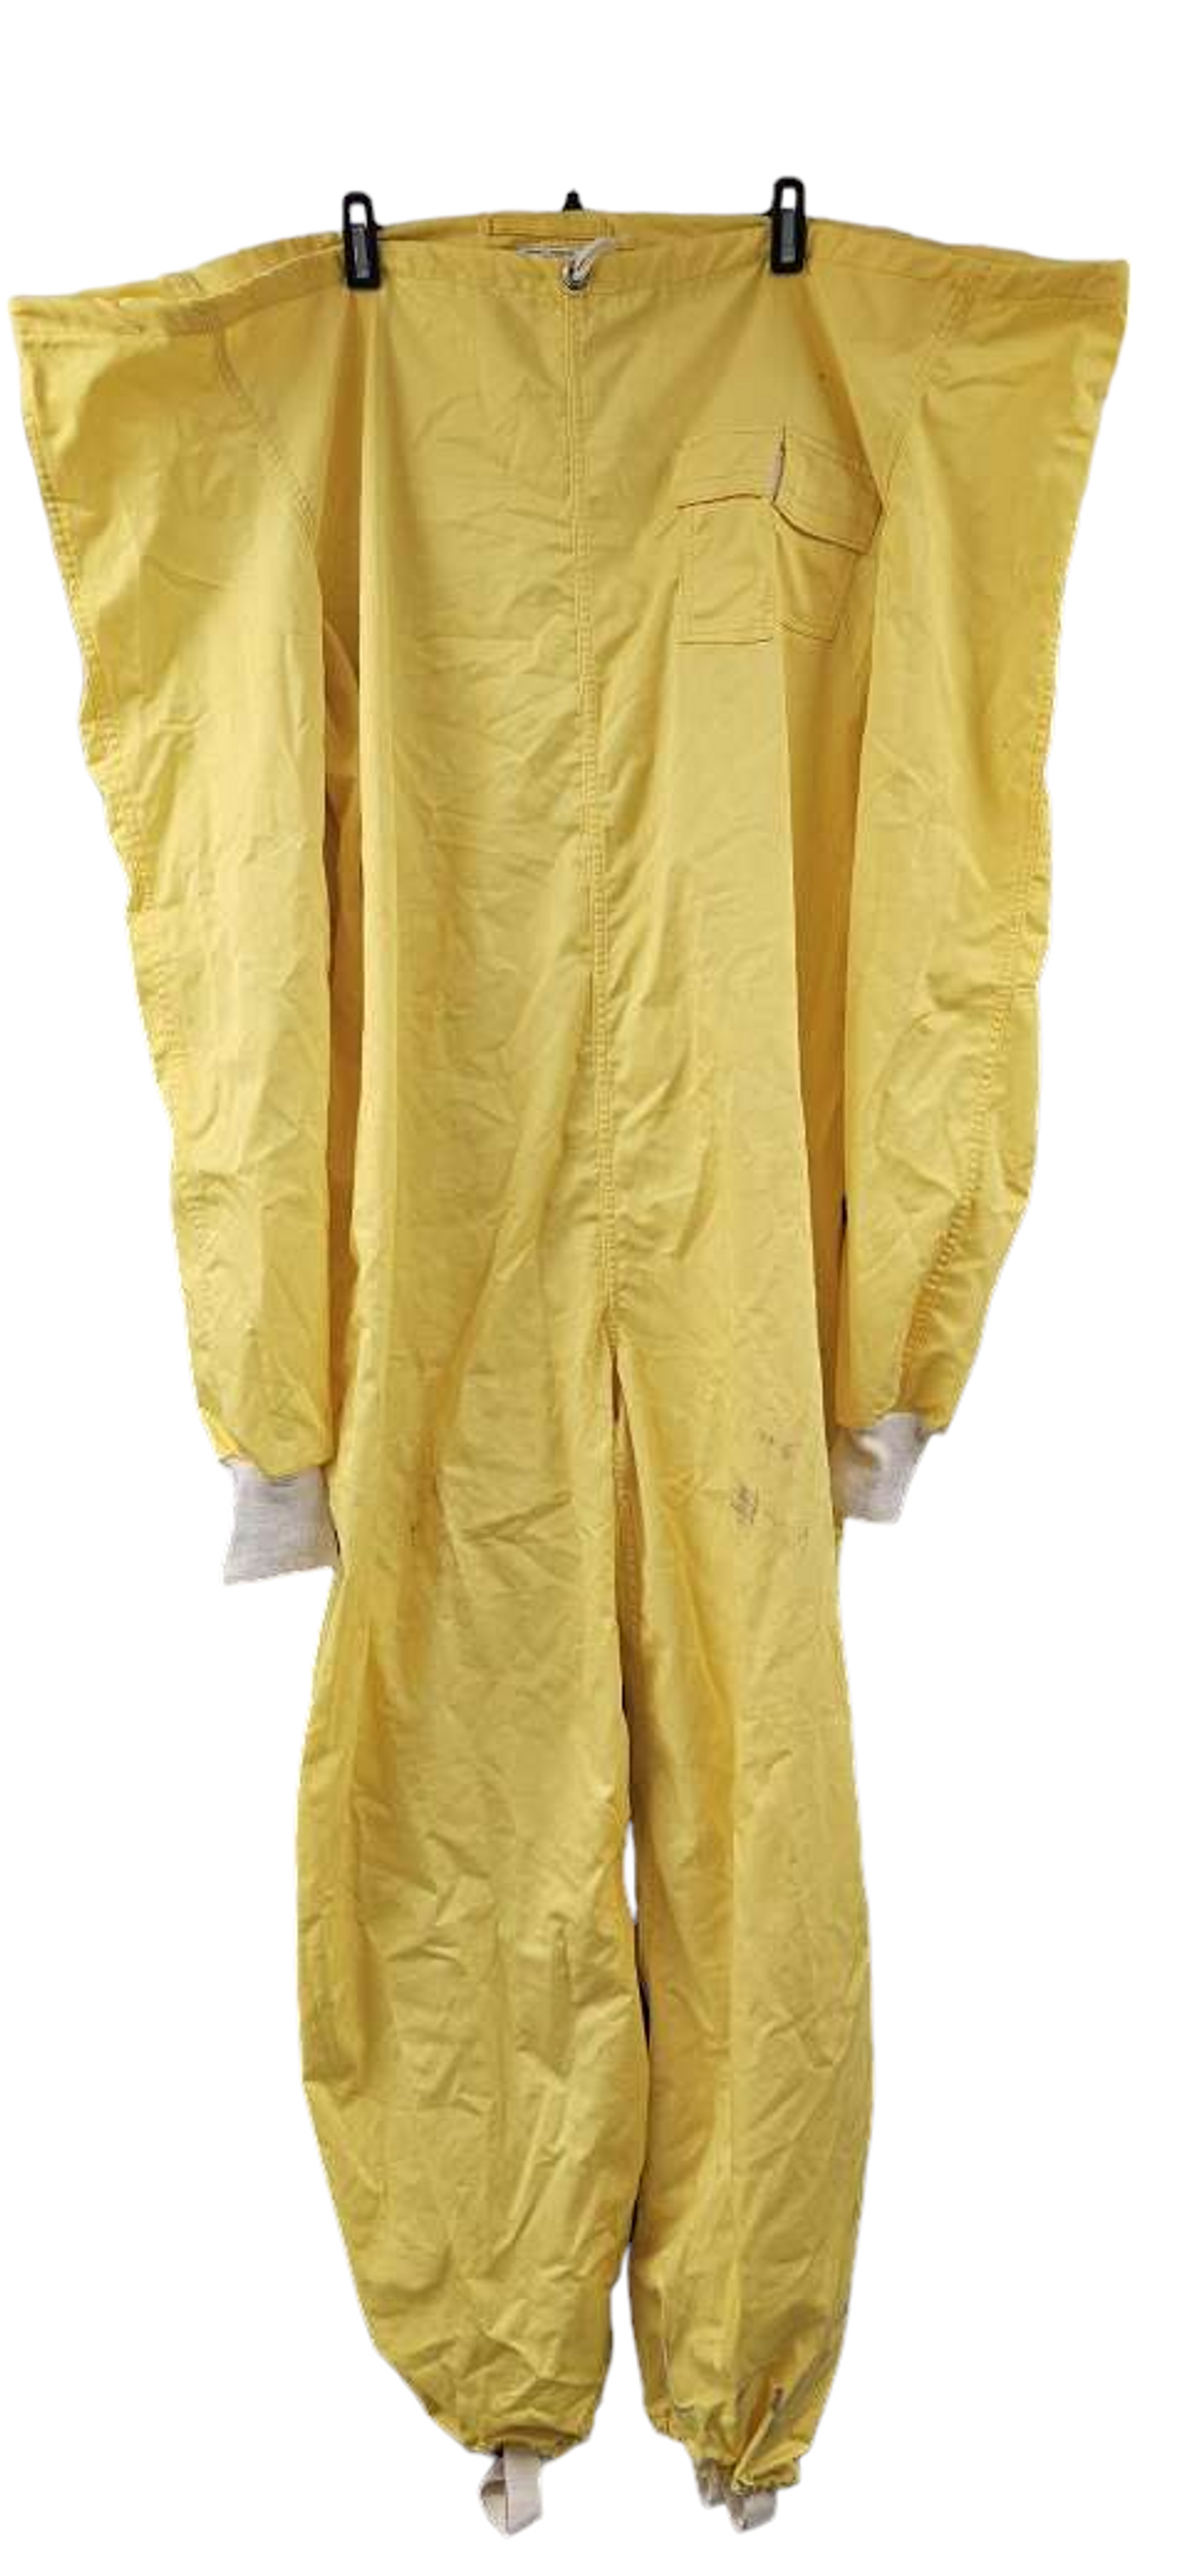 Canadian Armed Forces Radioactive Contaminants Protective Coveralls w/ Hood